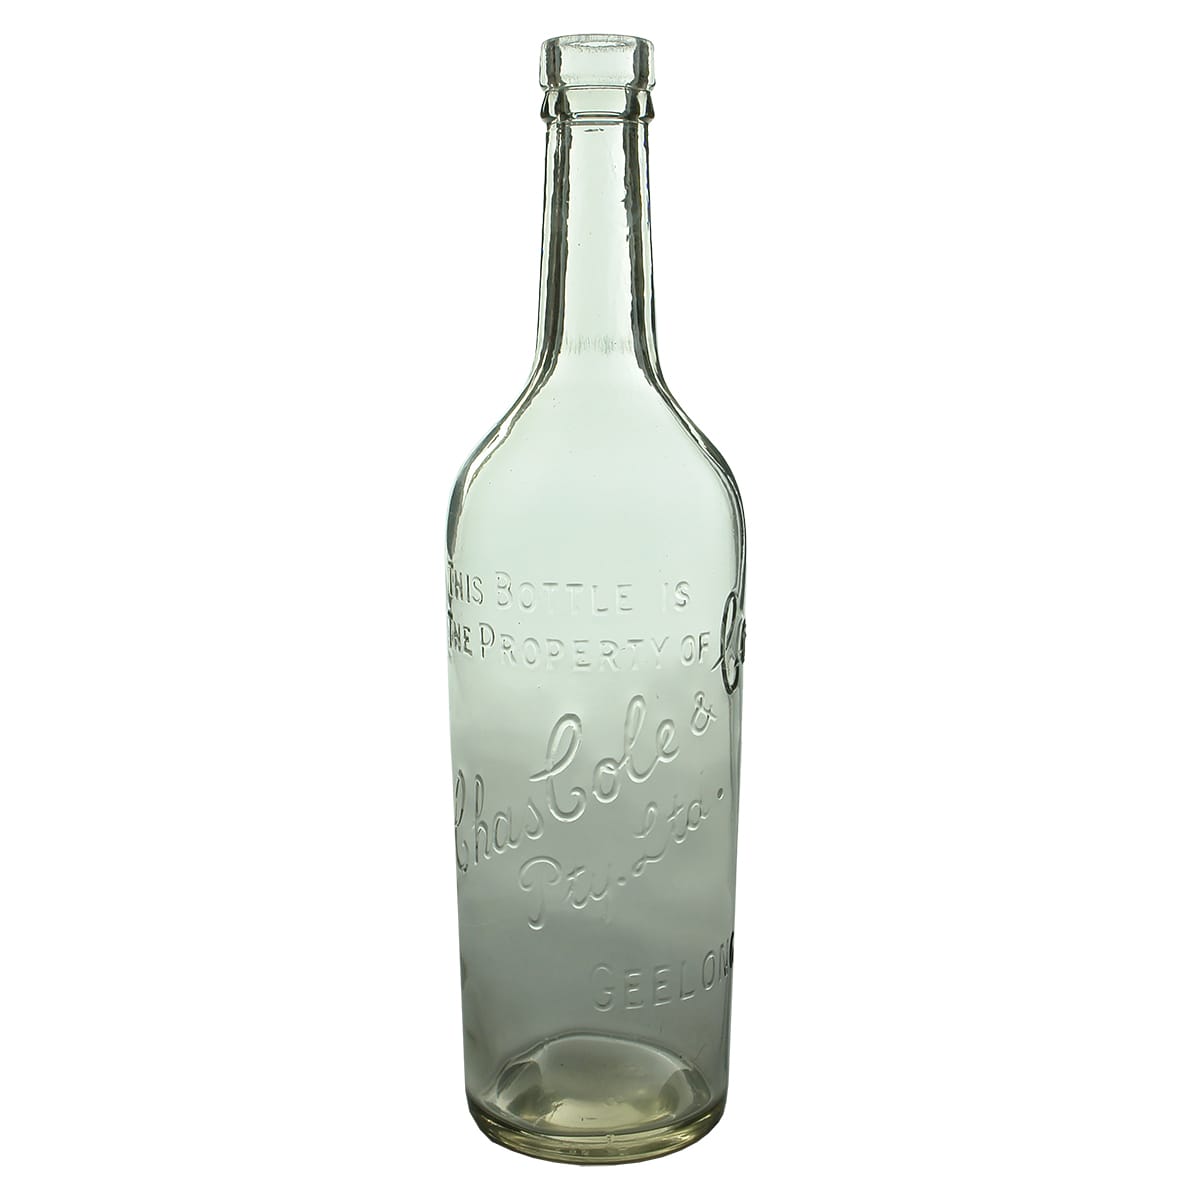 Gin. Chas Cole Geelong. Clear. 26 oz.